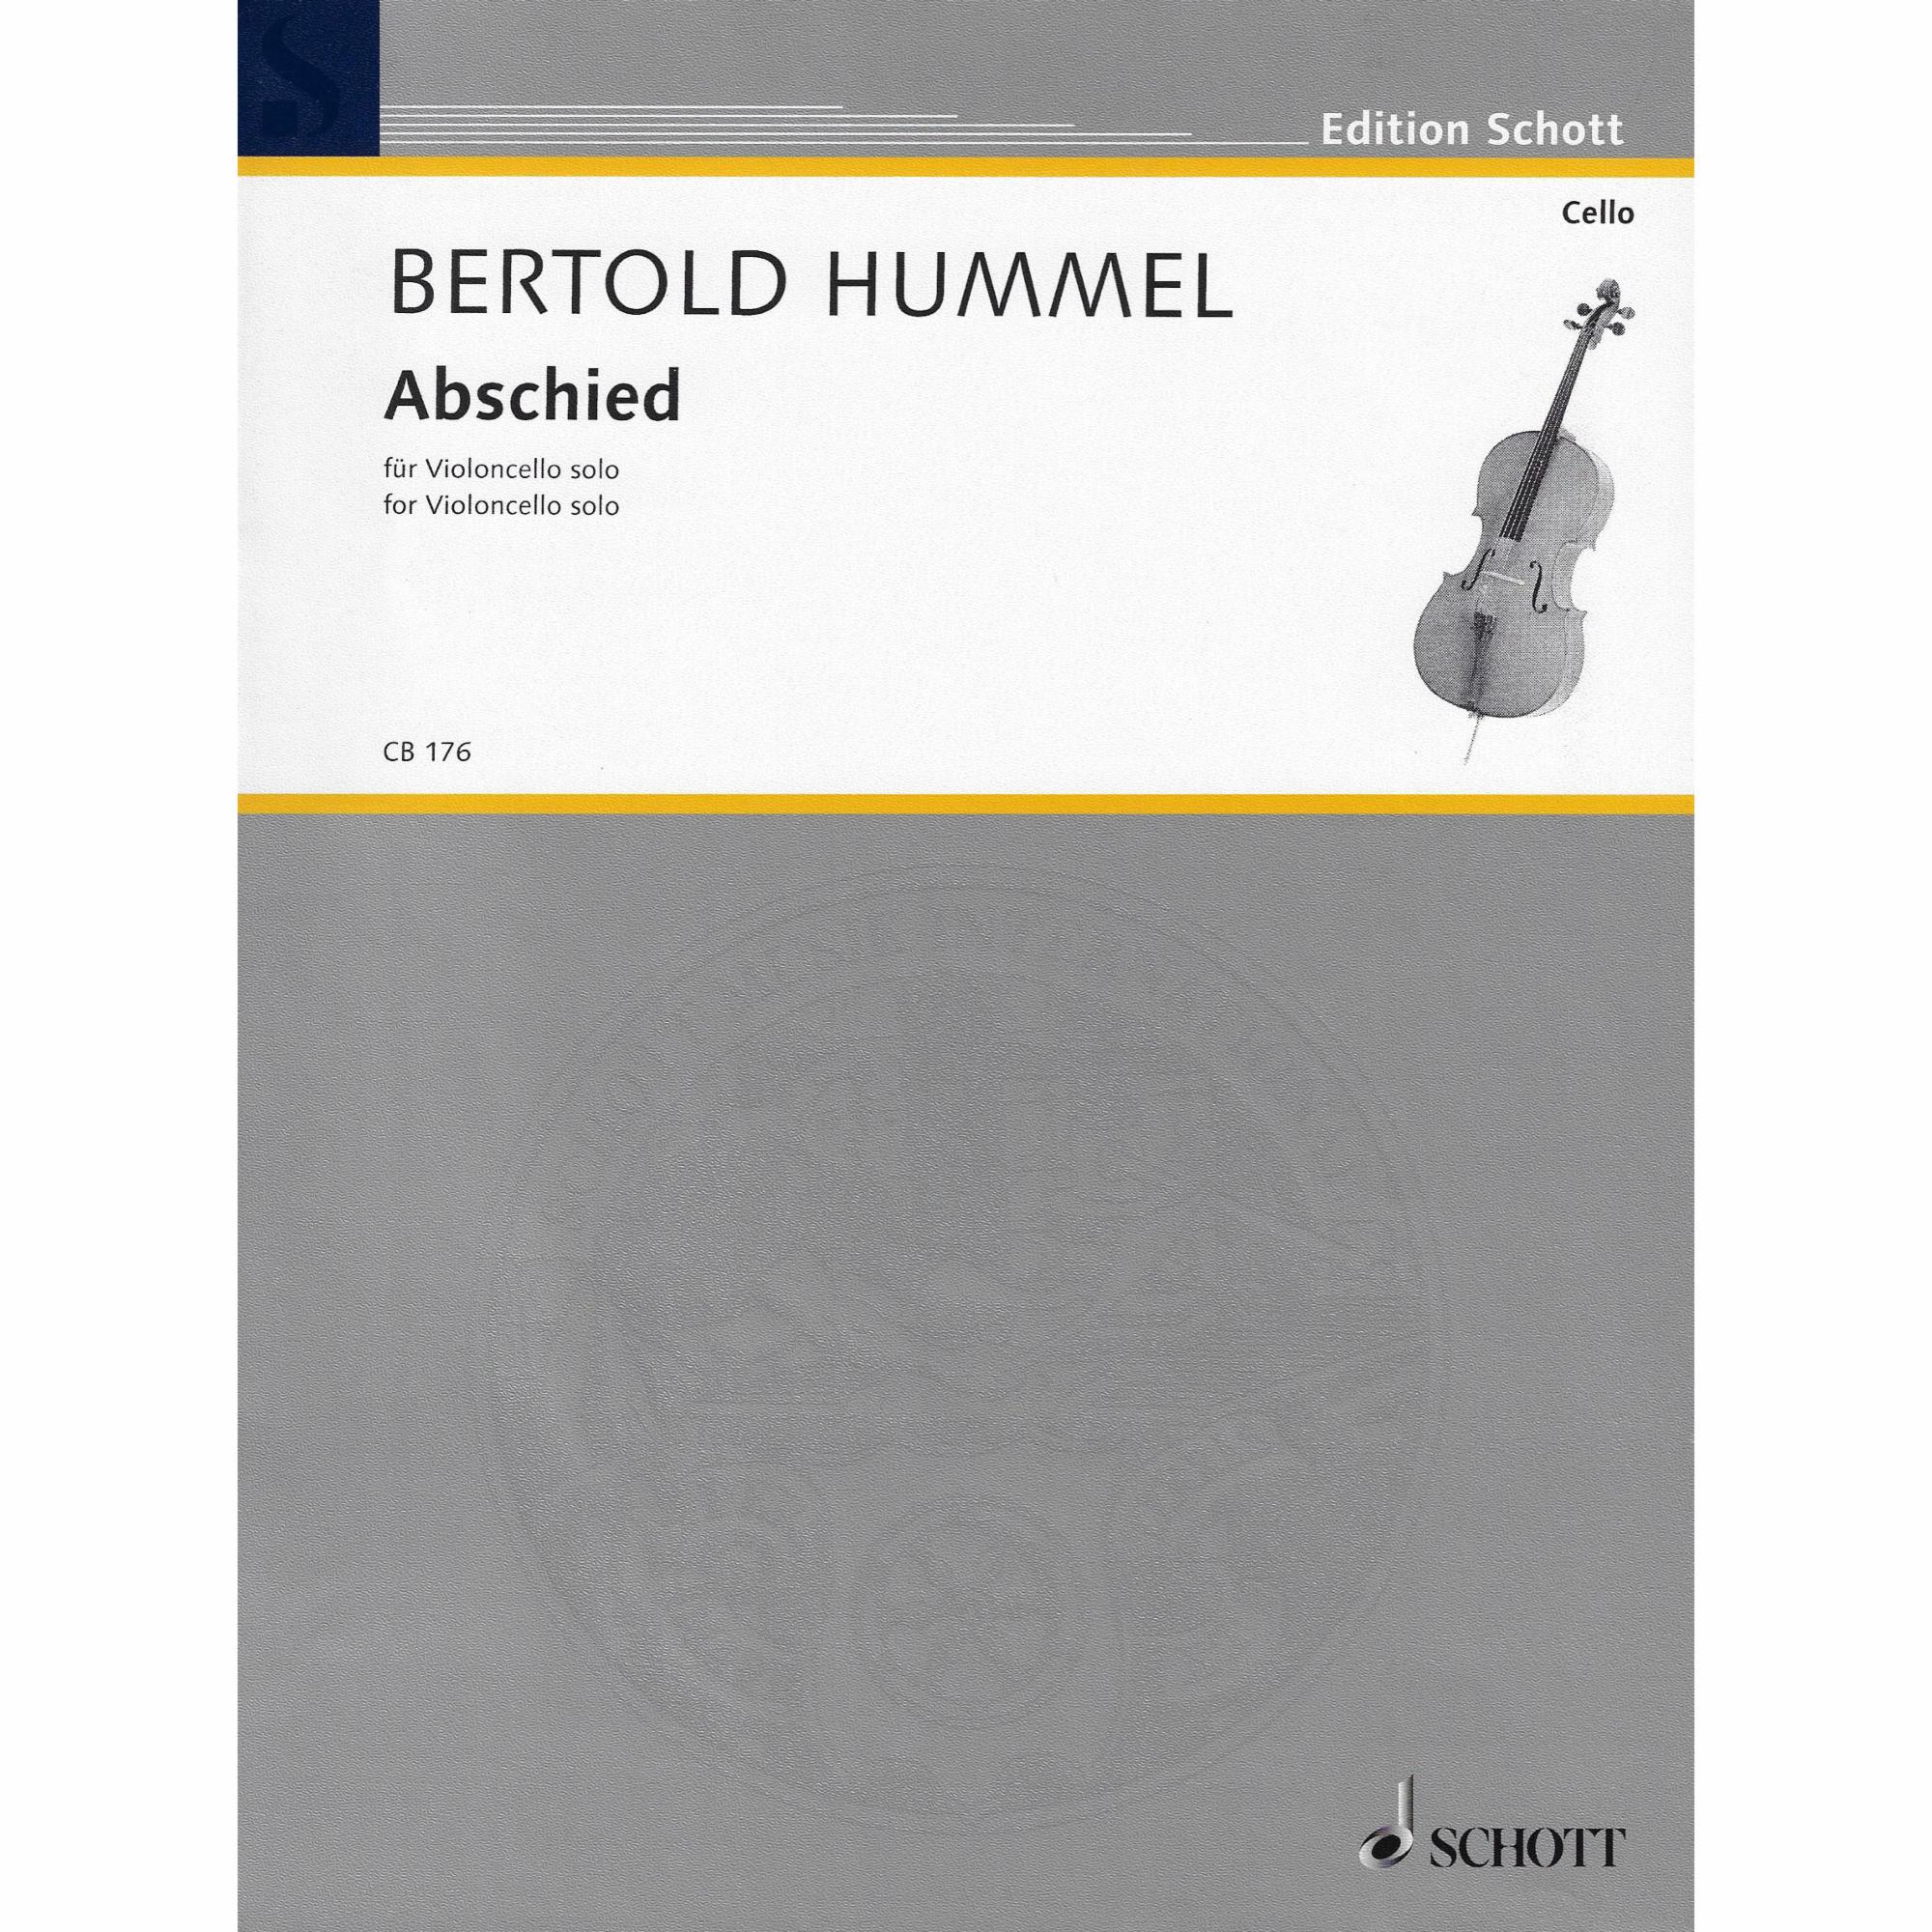 Hummel -- Abschied for Solo Cello